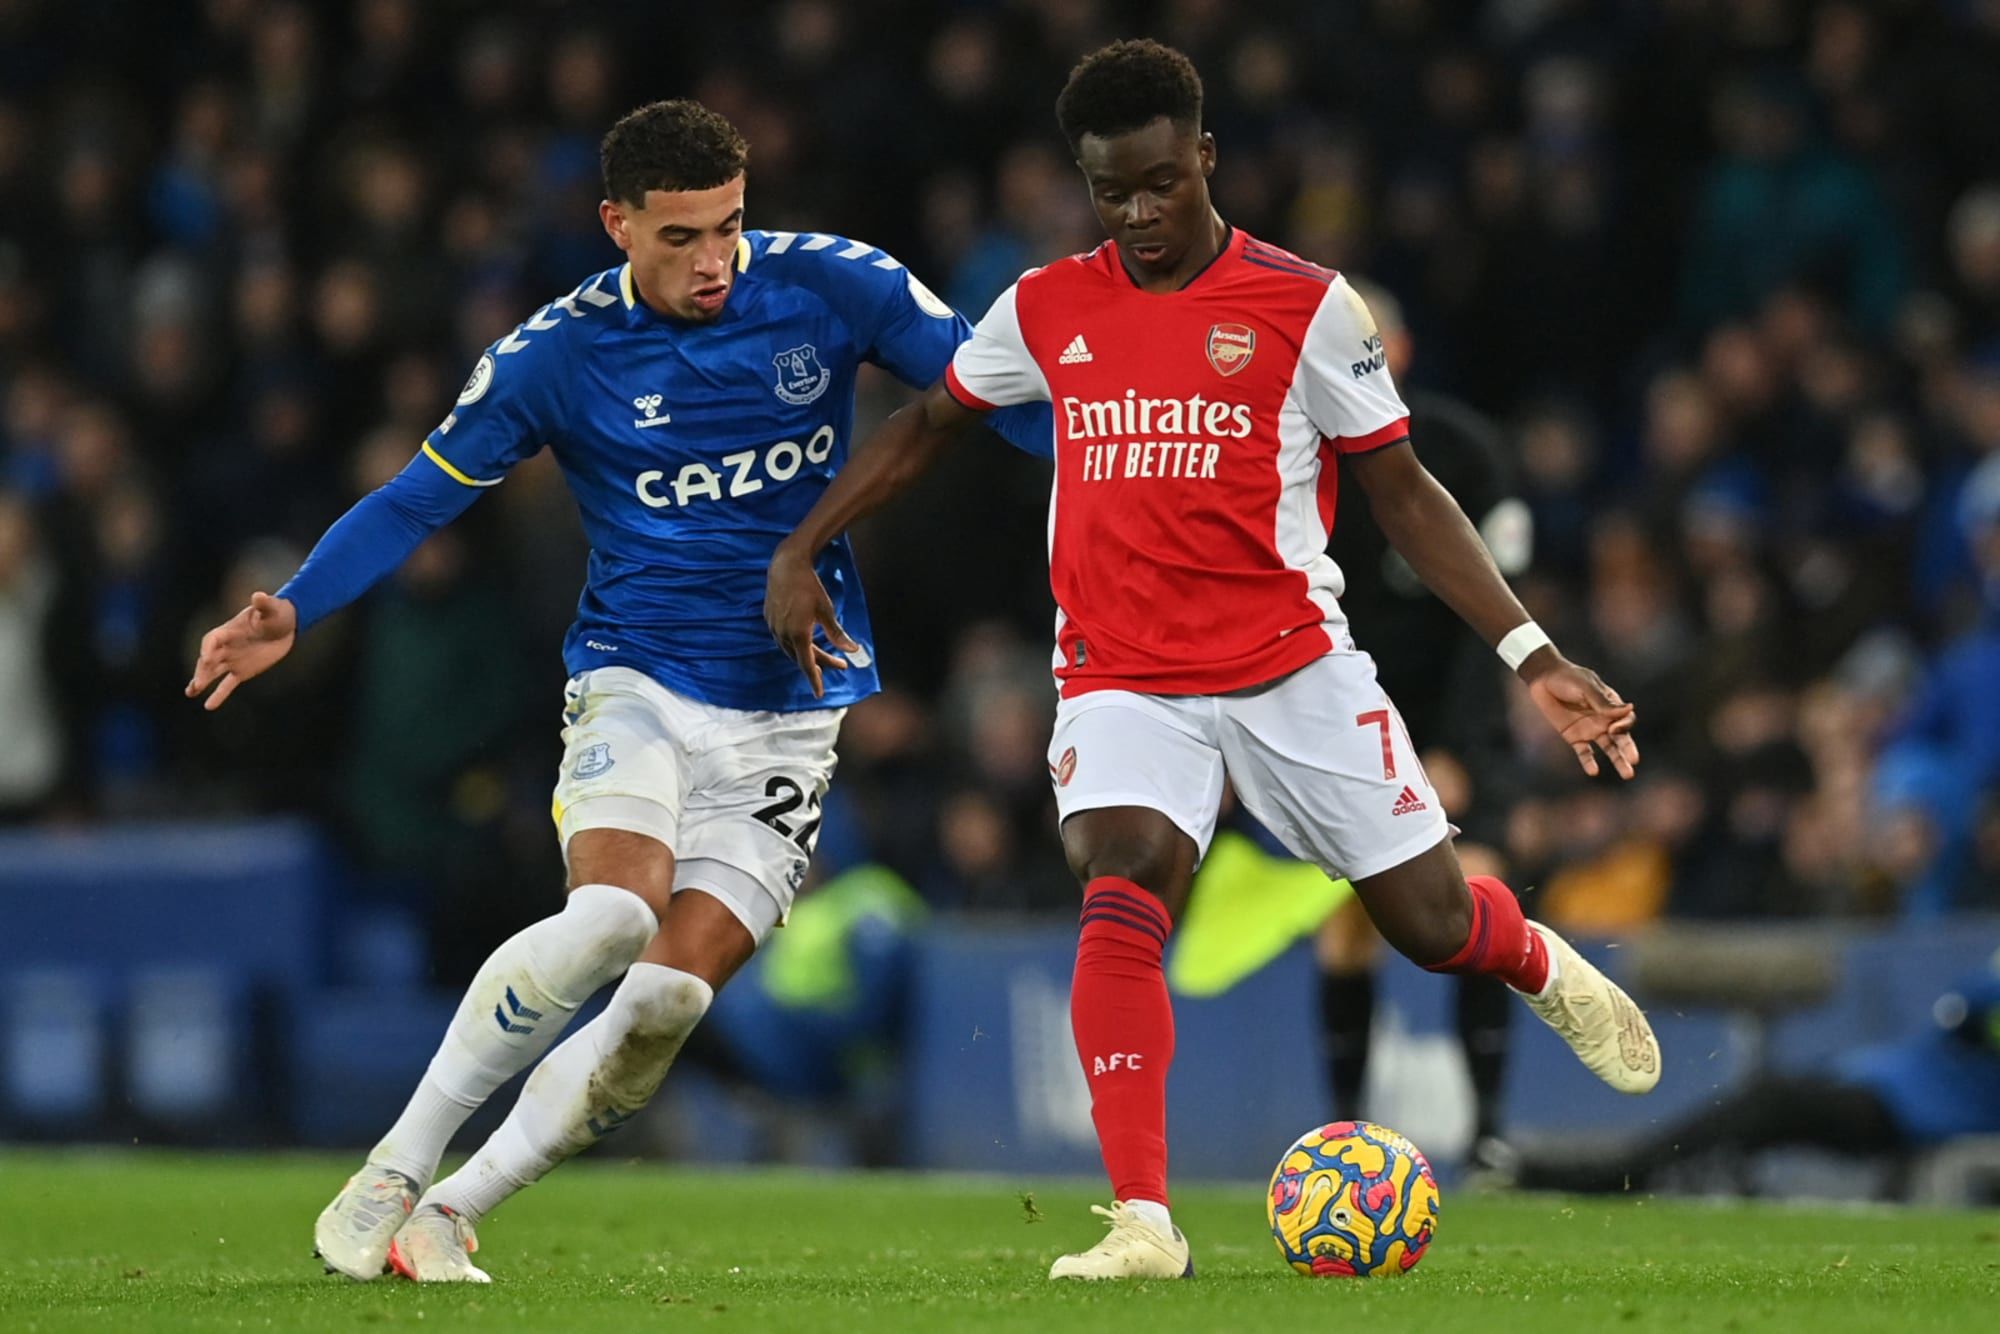 Arsenal vs Everton Match Preview, Where to Watch, Odds and Lineups | July 17